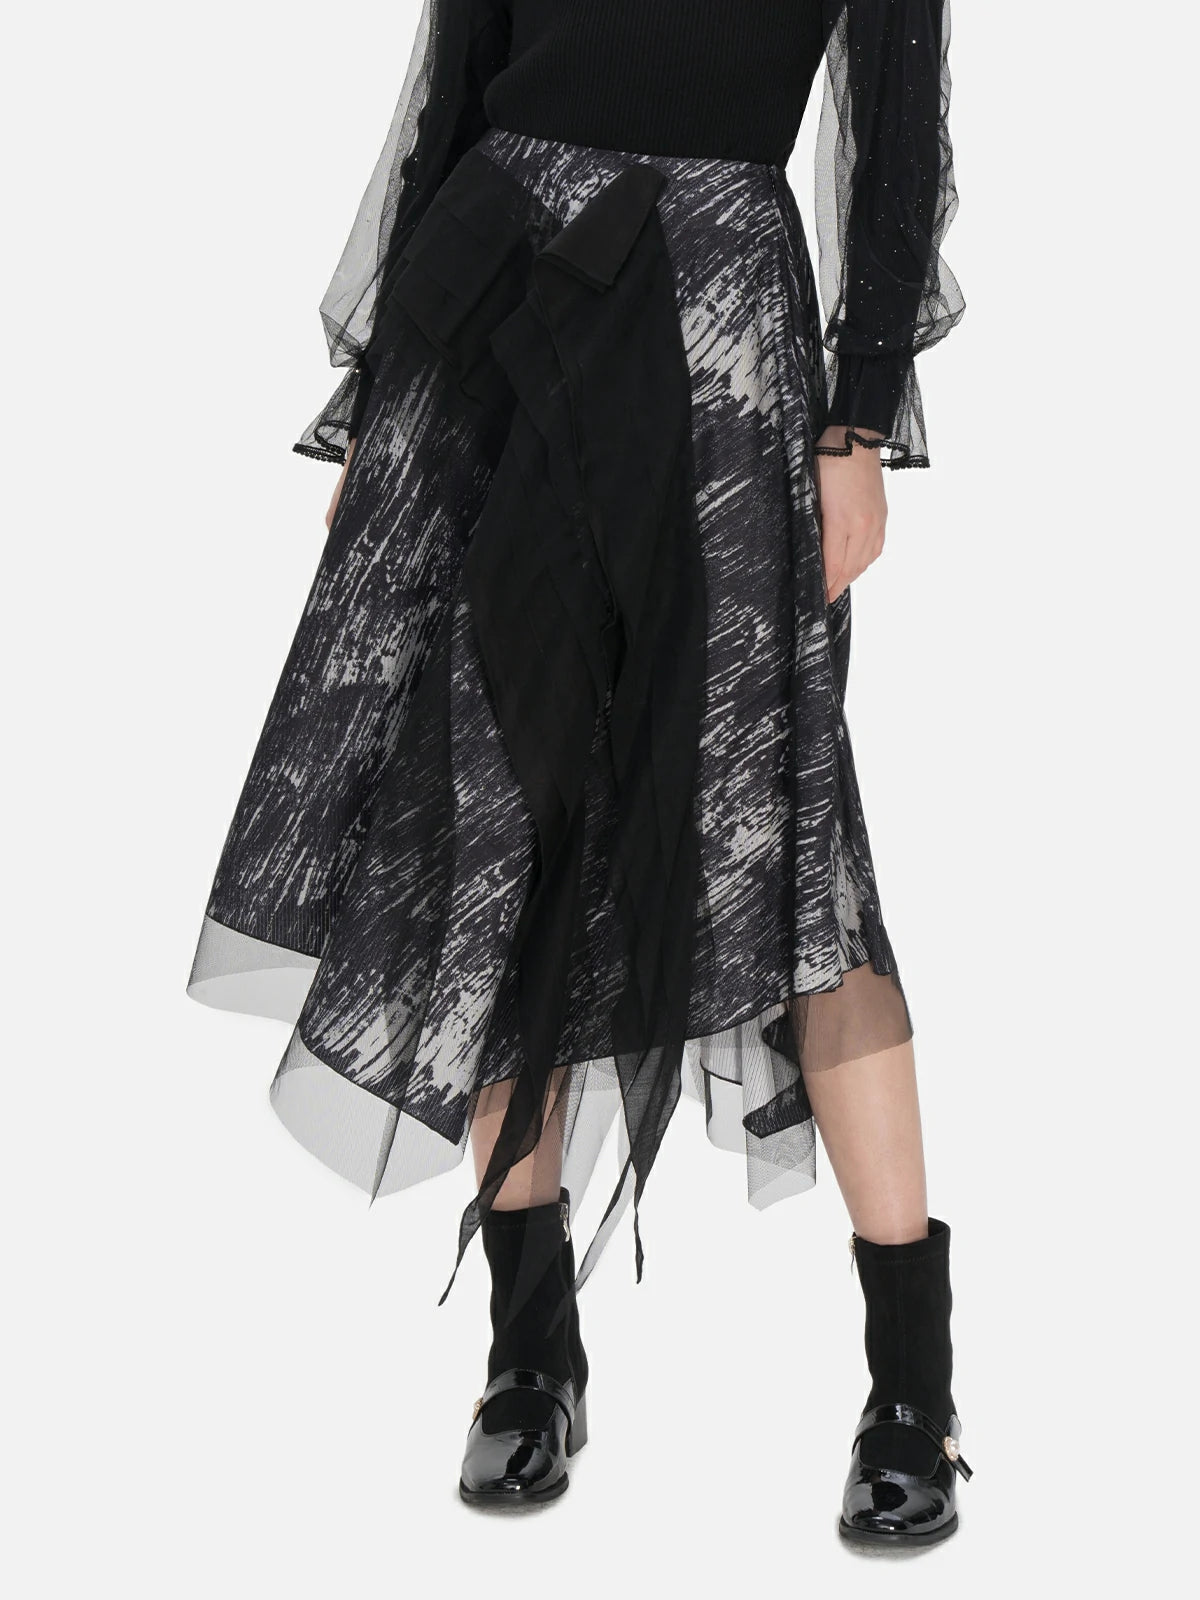 A-line midi skirt adorned with a distinctive black and white ink painting pattern, crafted with a two-layer design including a lightweight tulle outer layer and a soft inner layer.